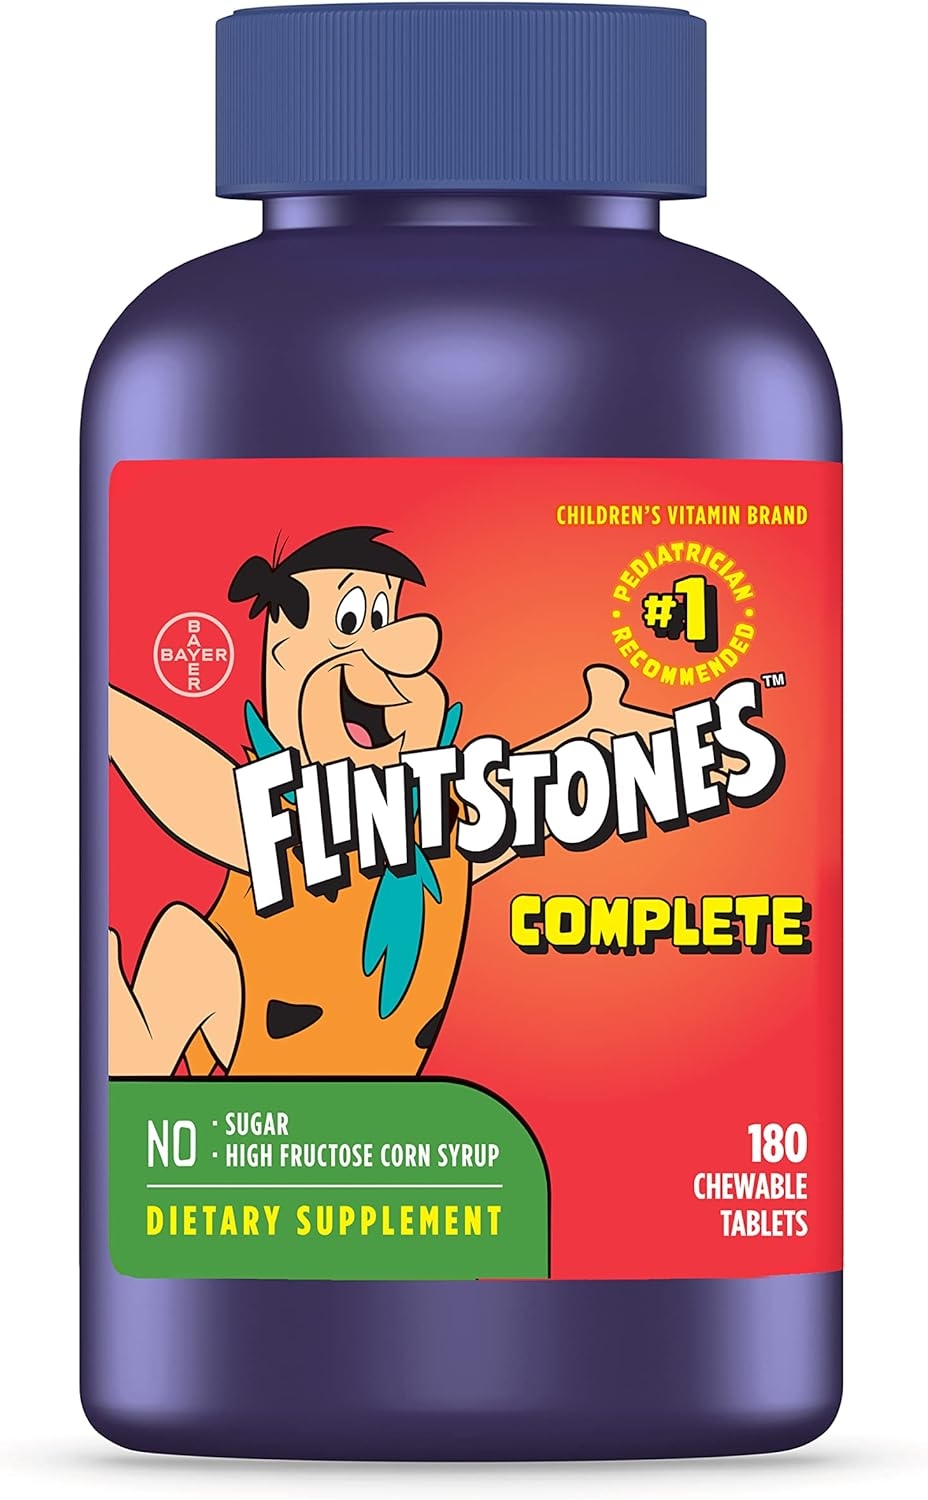 Flintstones Chewable Kids Vitamins, Complete Multivitamin for Kids and Toddlers with Iron, Calcium, Vitamin C, Vitamin D & more, 180 count (Packaging May Vary)